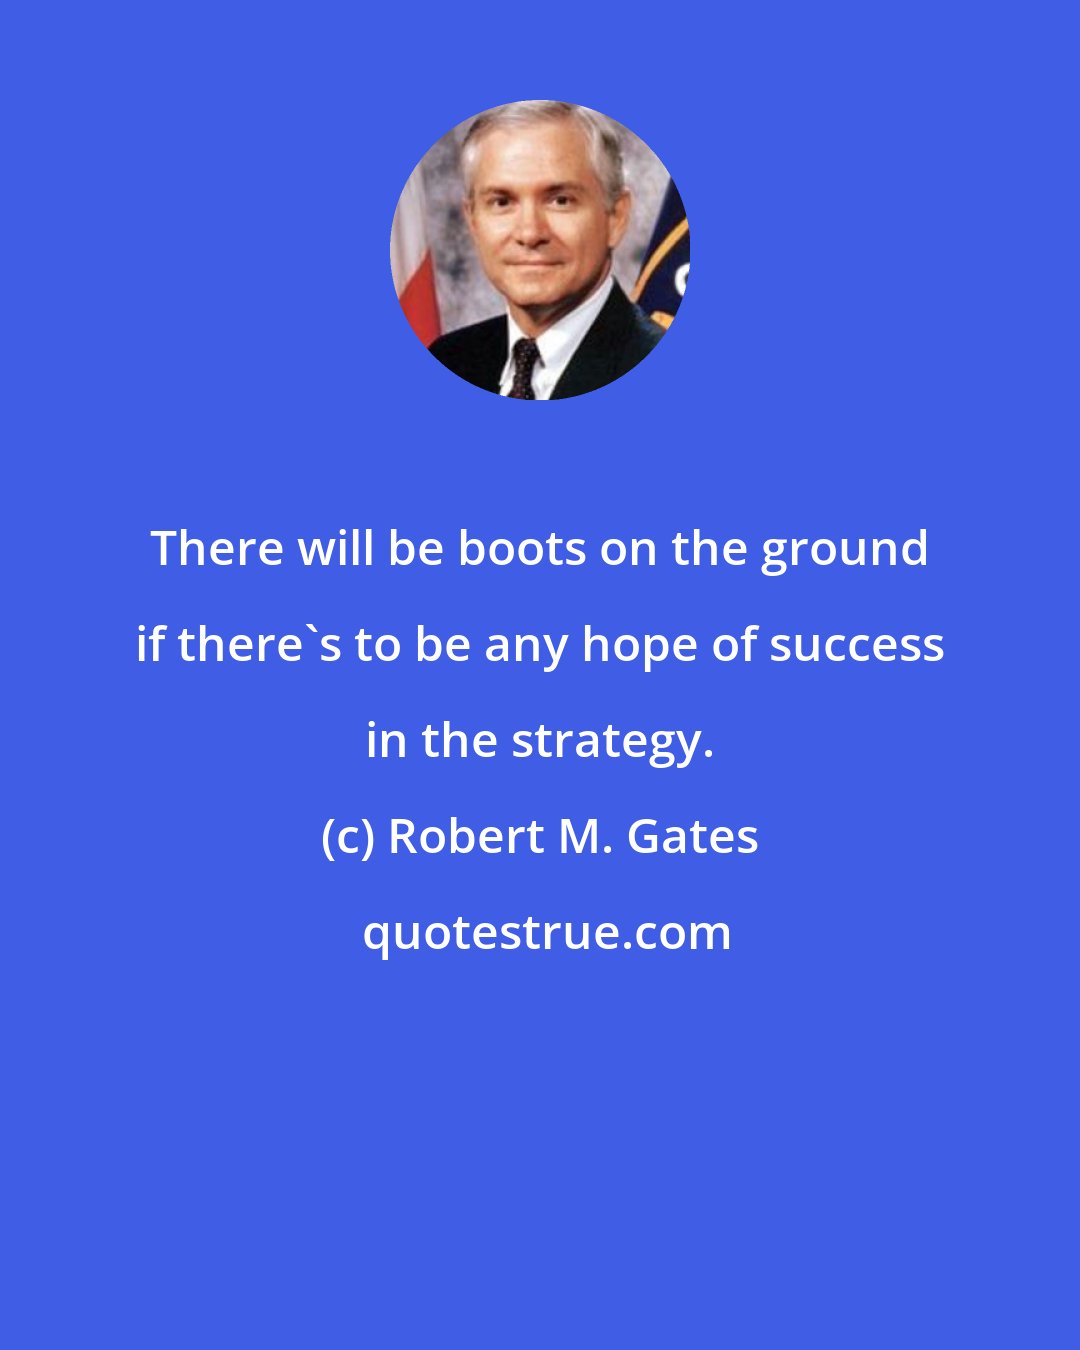 Robert M. Gates: There will be boots on the ground if there's to be any hope of success in the strategy.